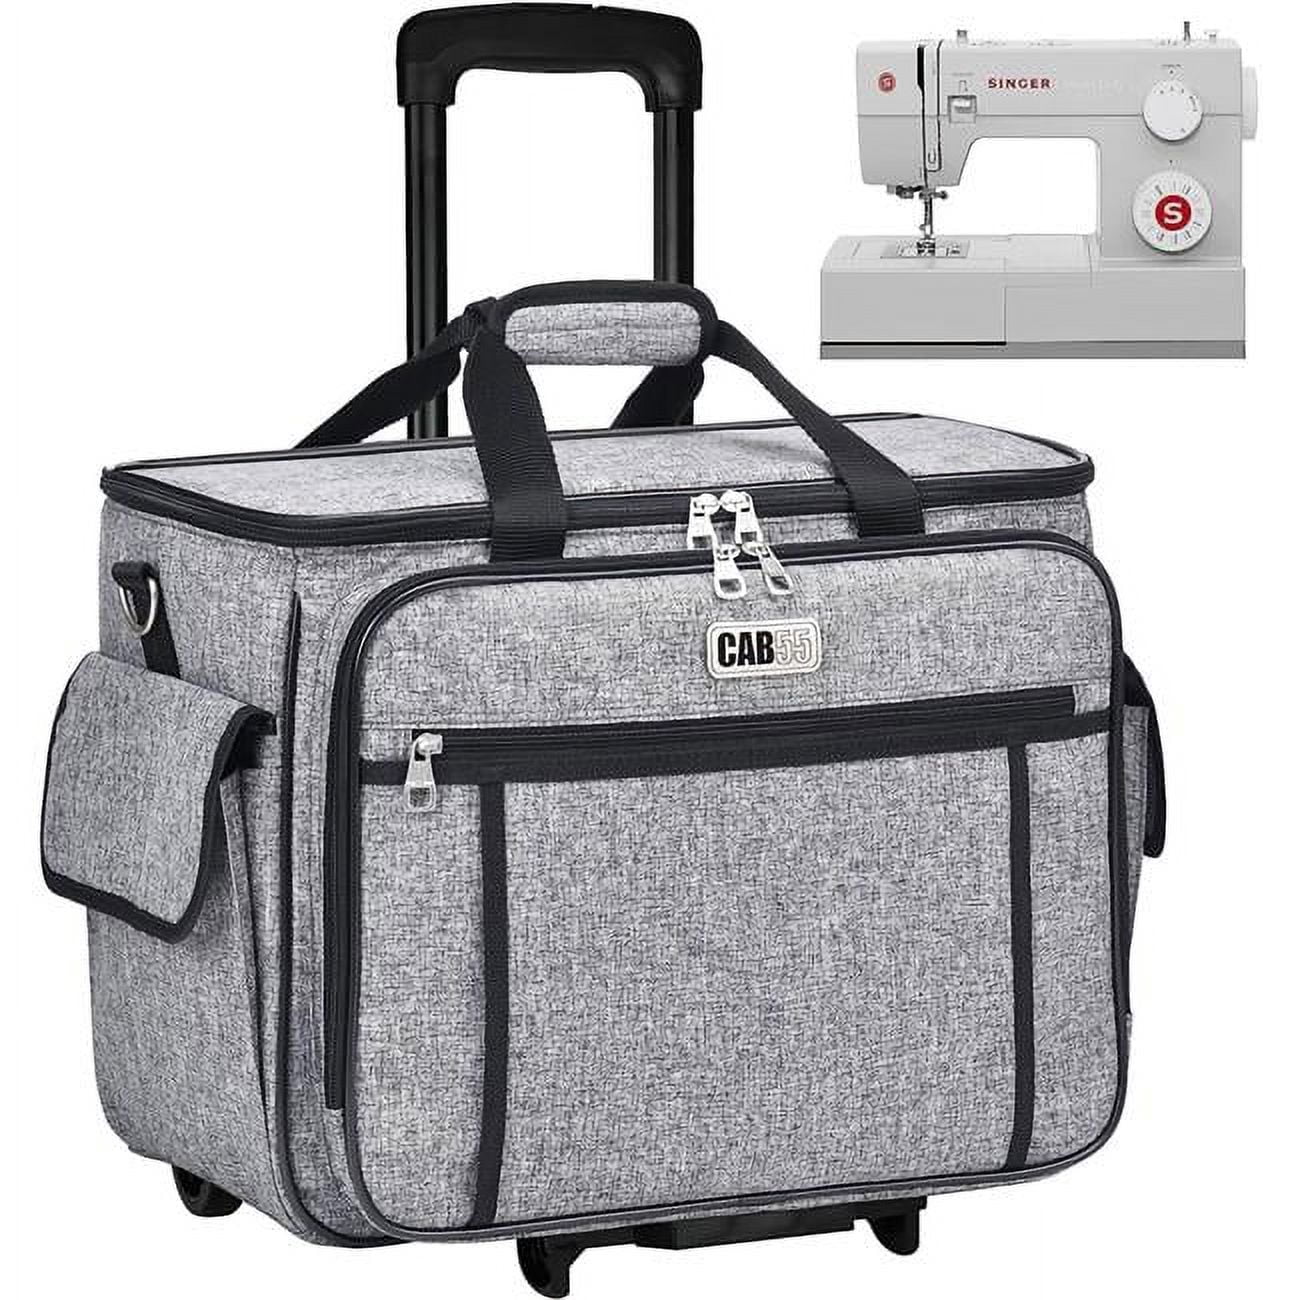 Universal Sewing Machine Hard Storage Carrying Case Fits Most